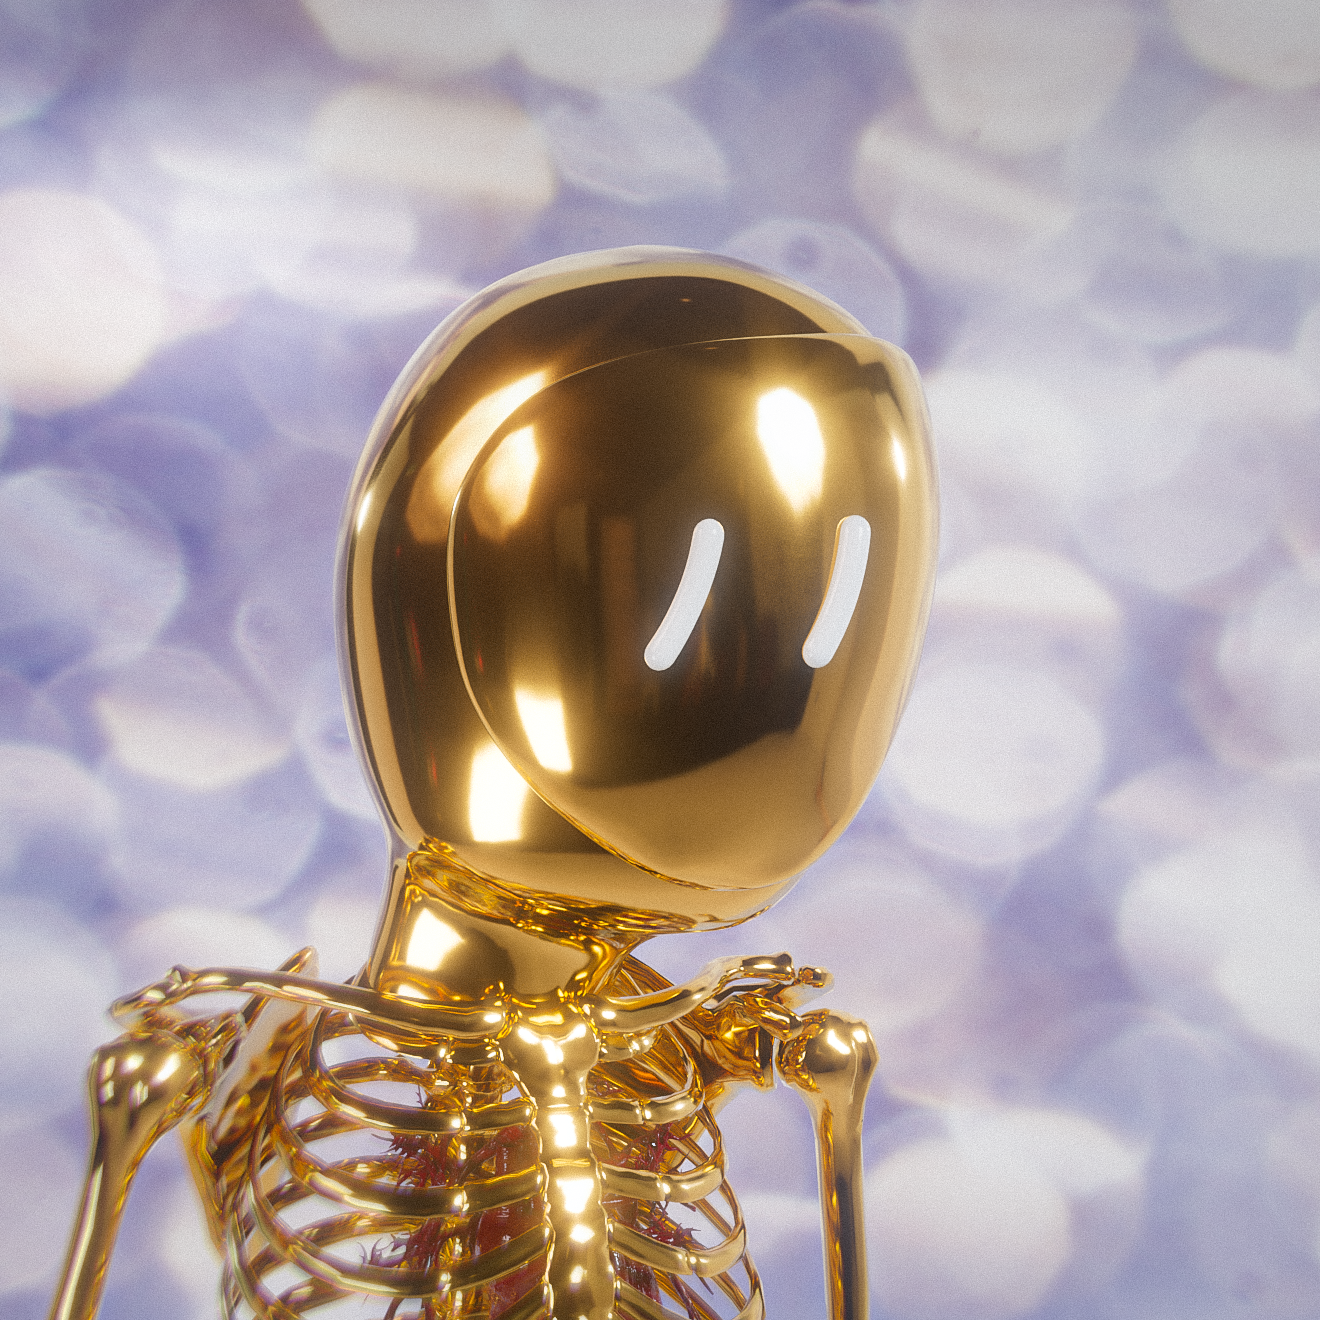 3D ANON #551 - Gold Skelly